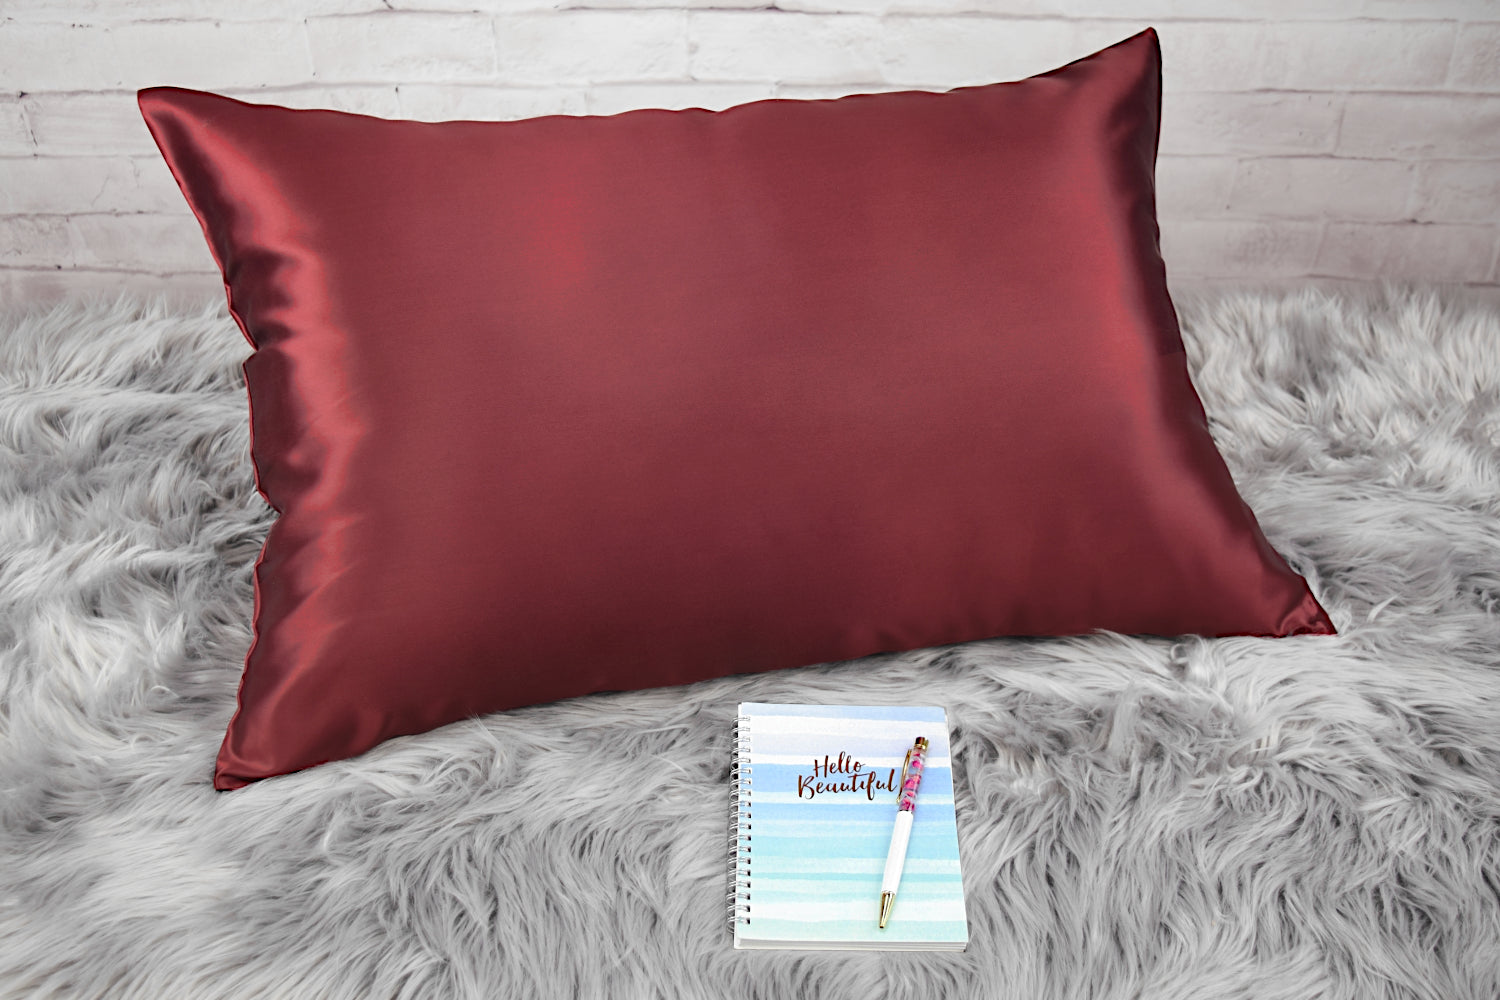 Celestial Silk Maroon 25 momme Silk Pillowcase on rug with notebook and pretty pen